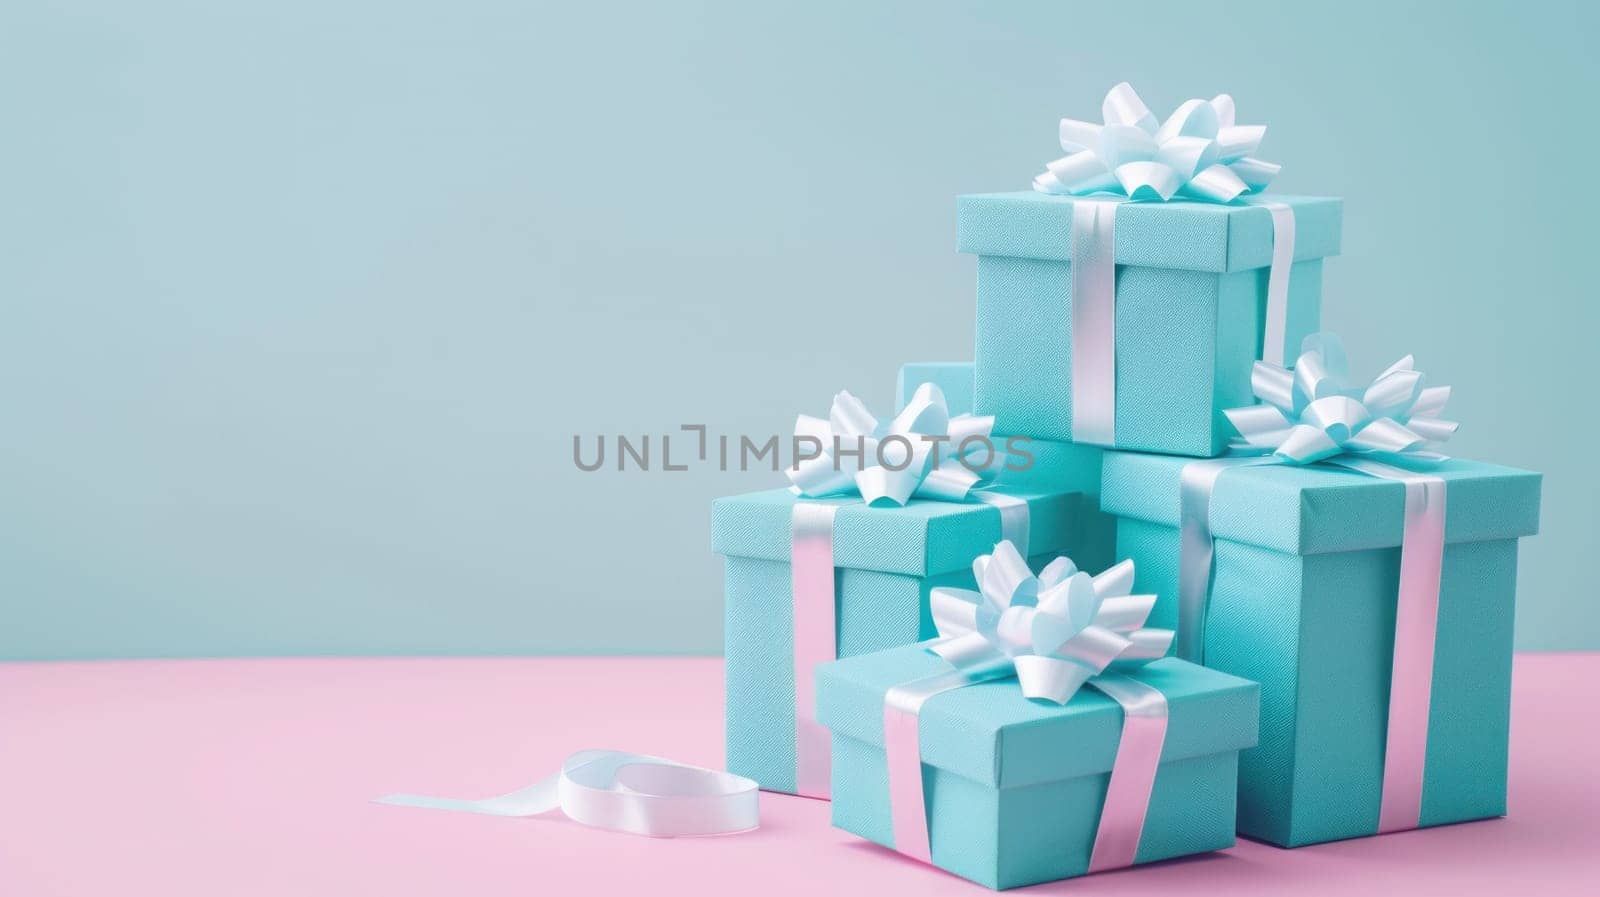 Blue gift boxes with white bows on pink and blue background for celebrating special occasions